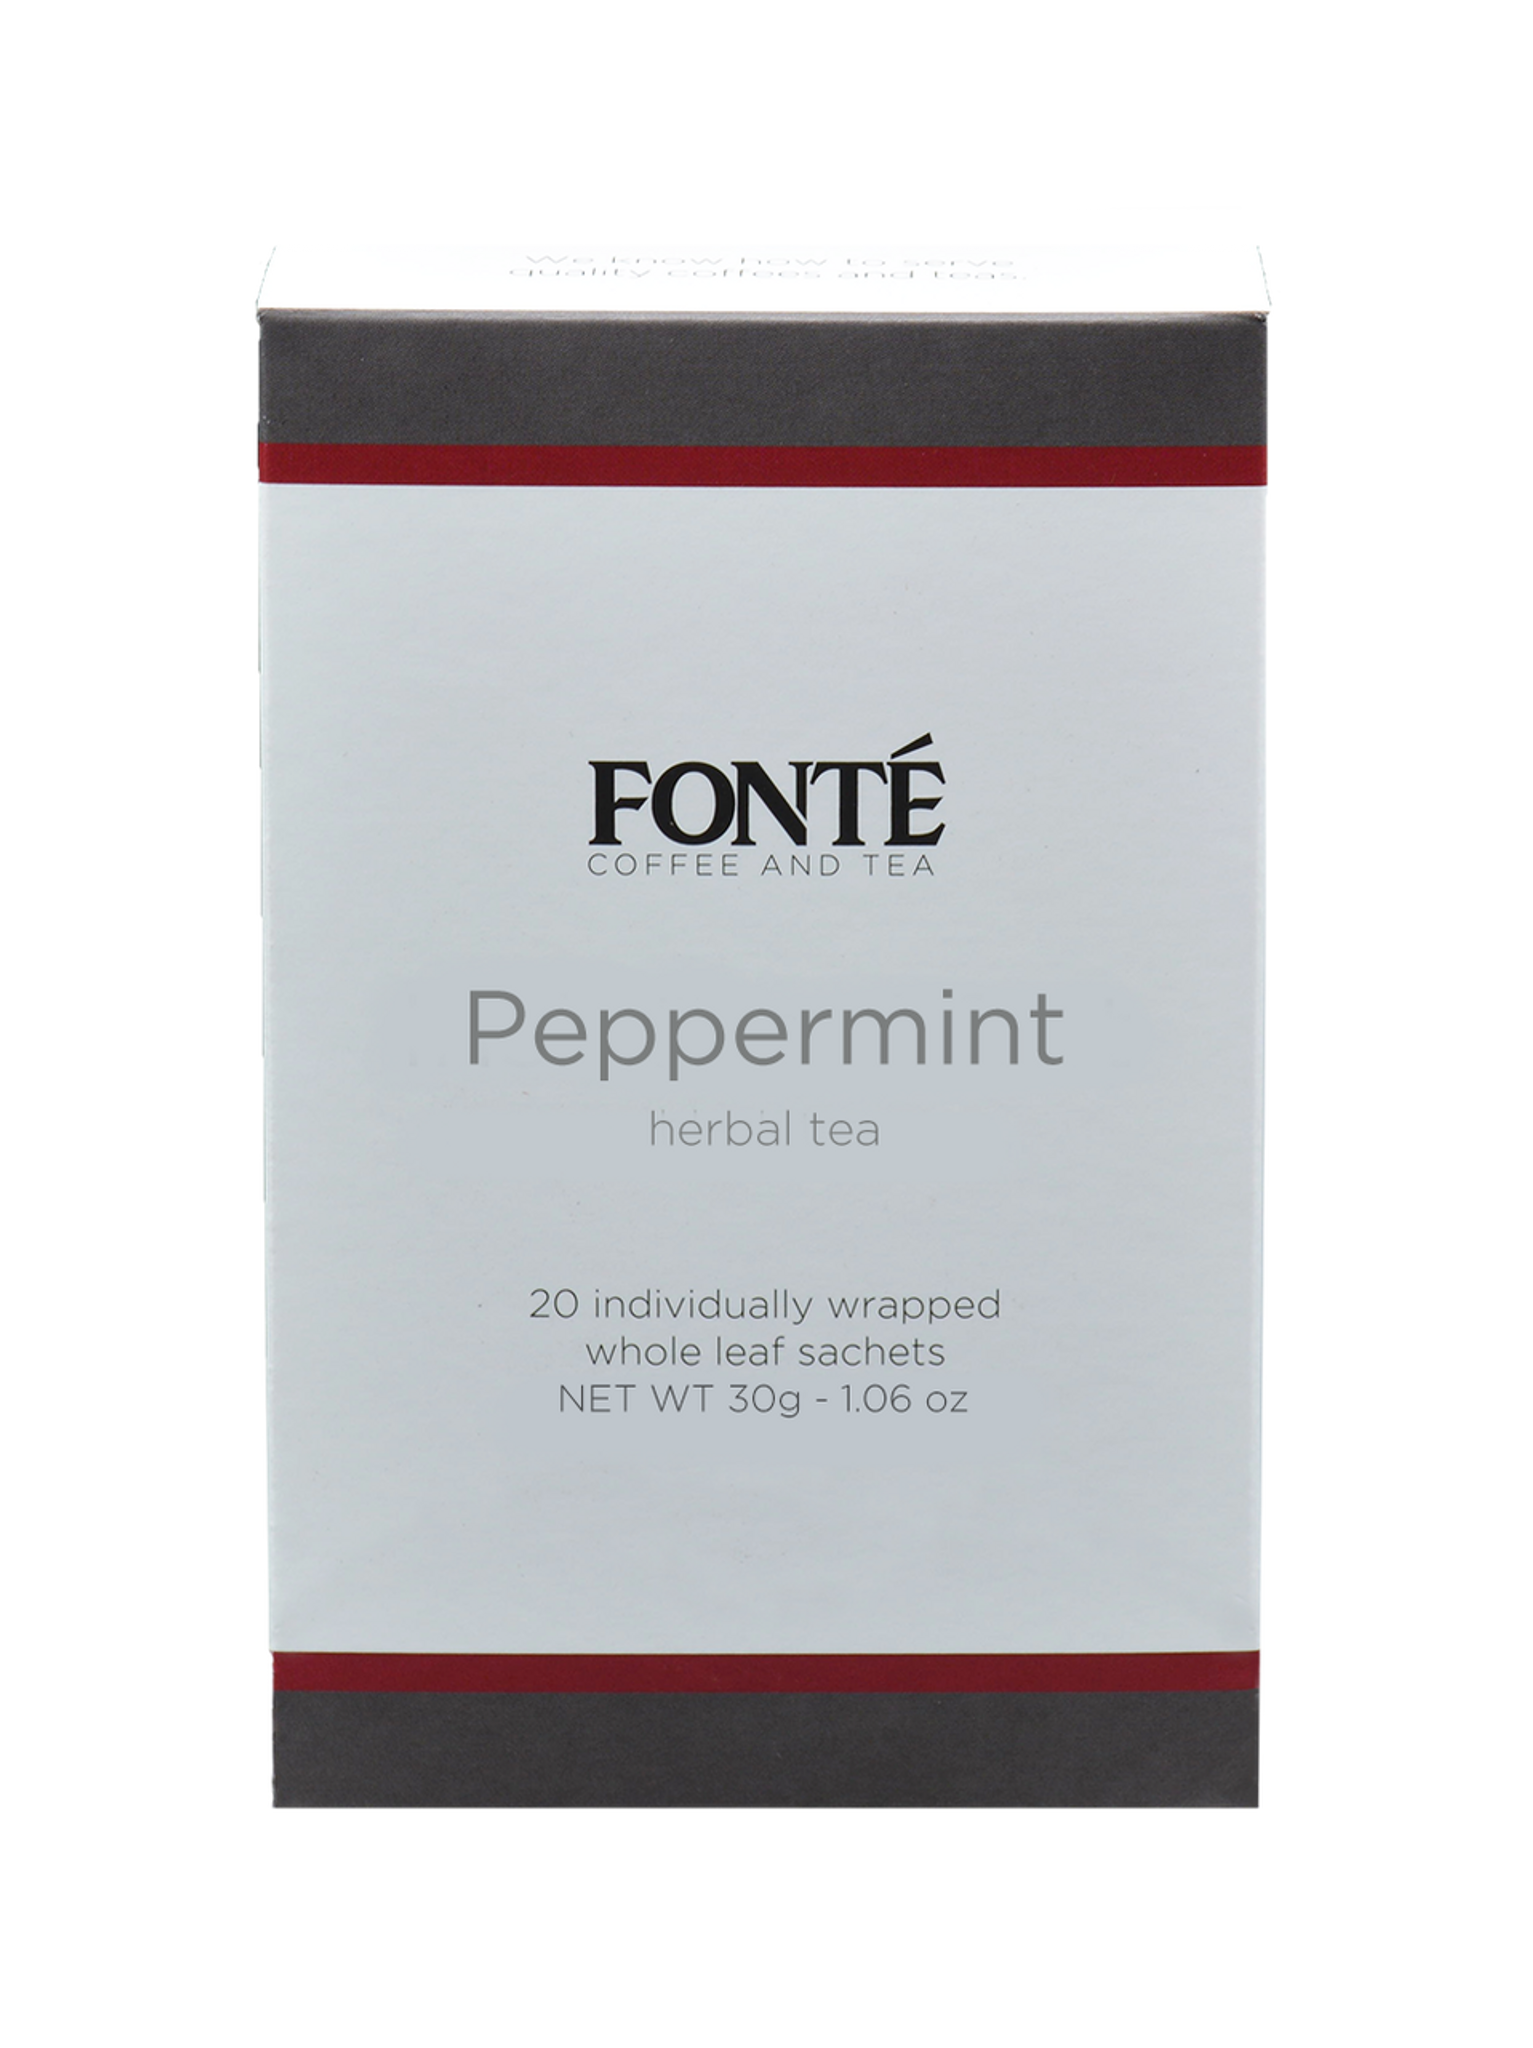 Buy Fonte Peppermint Specialty Herbal Tea Available for Weekly, Biweekly, Monthly or Bimonthly Subscriptions 
